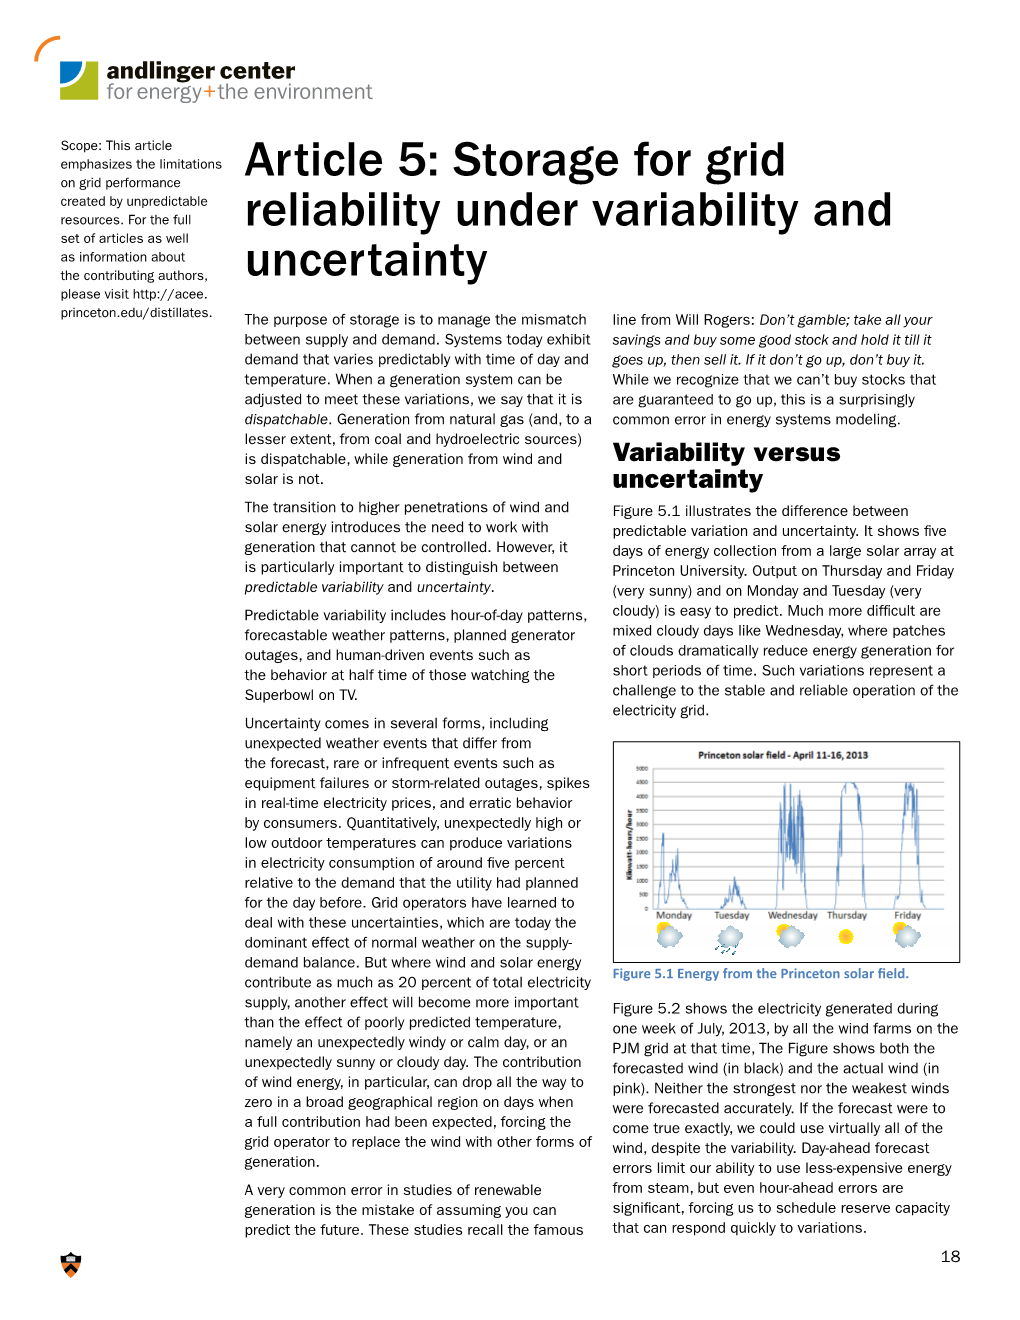 Storage for Grid Reliability Under Variability And